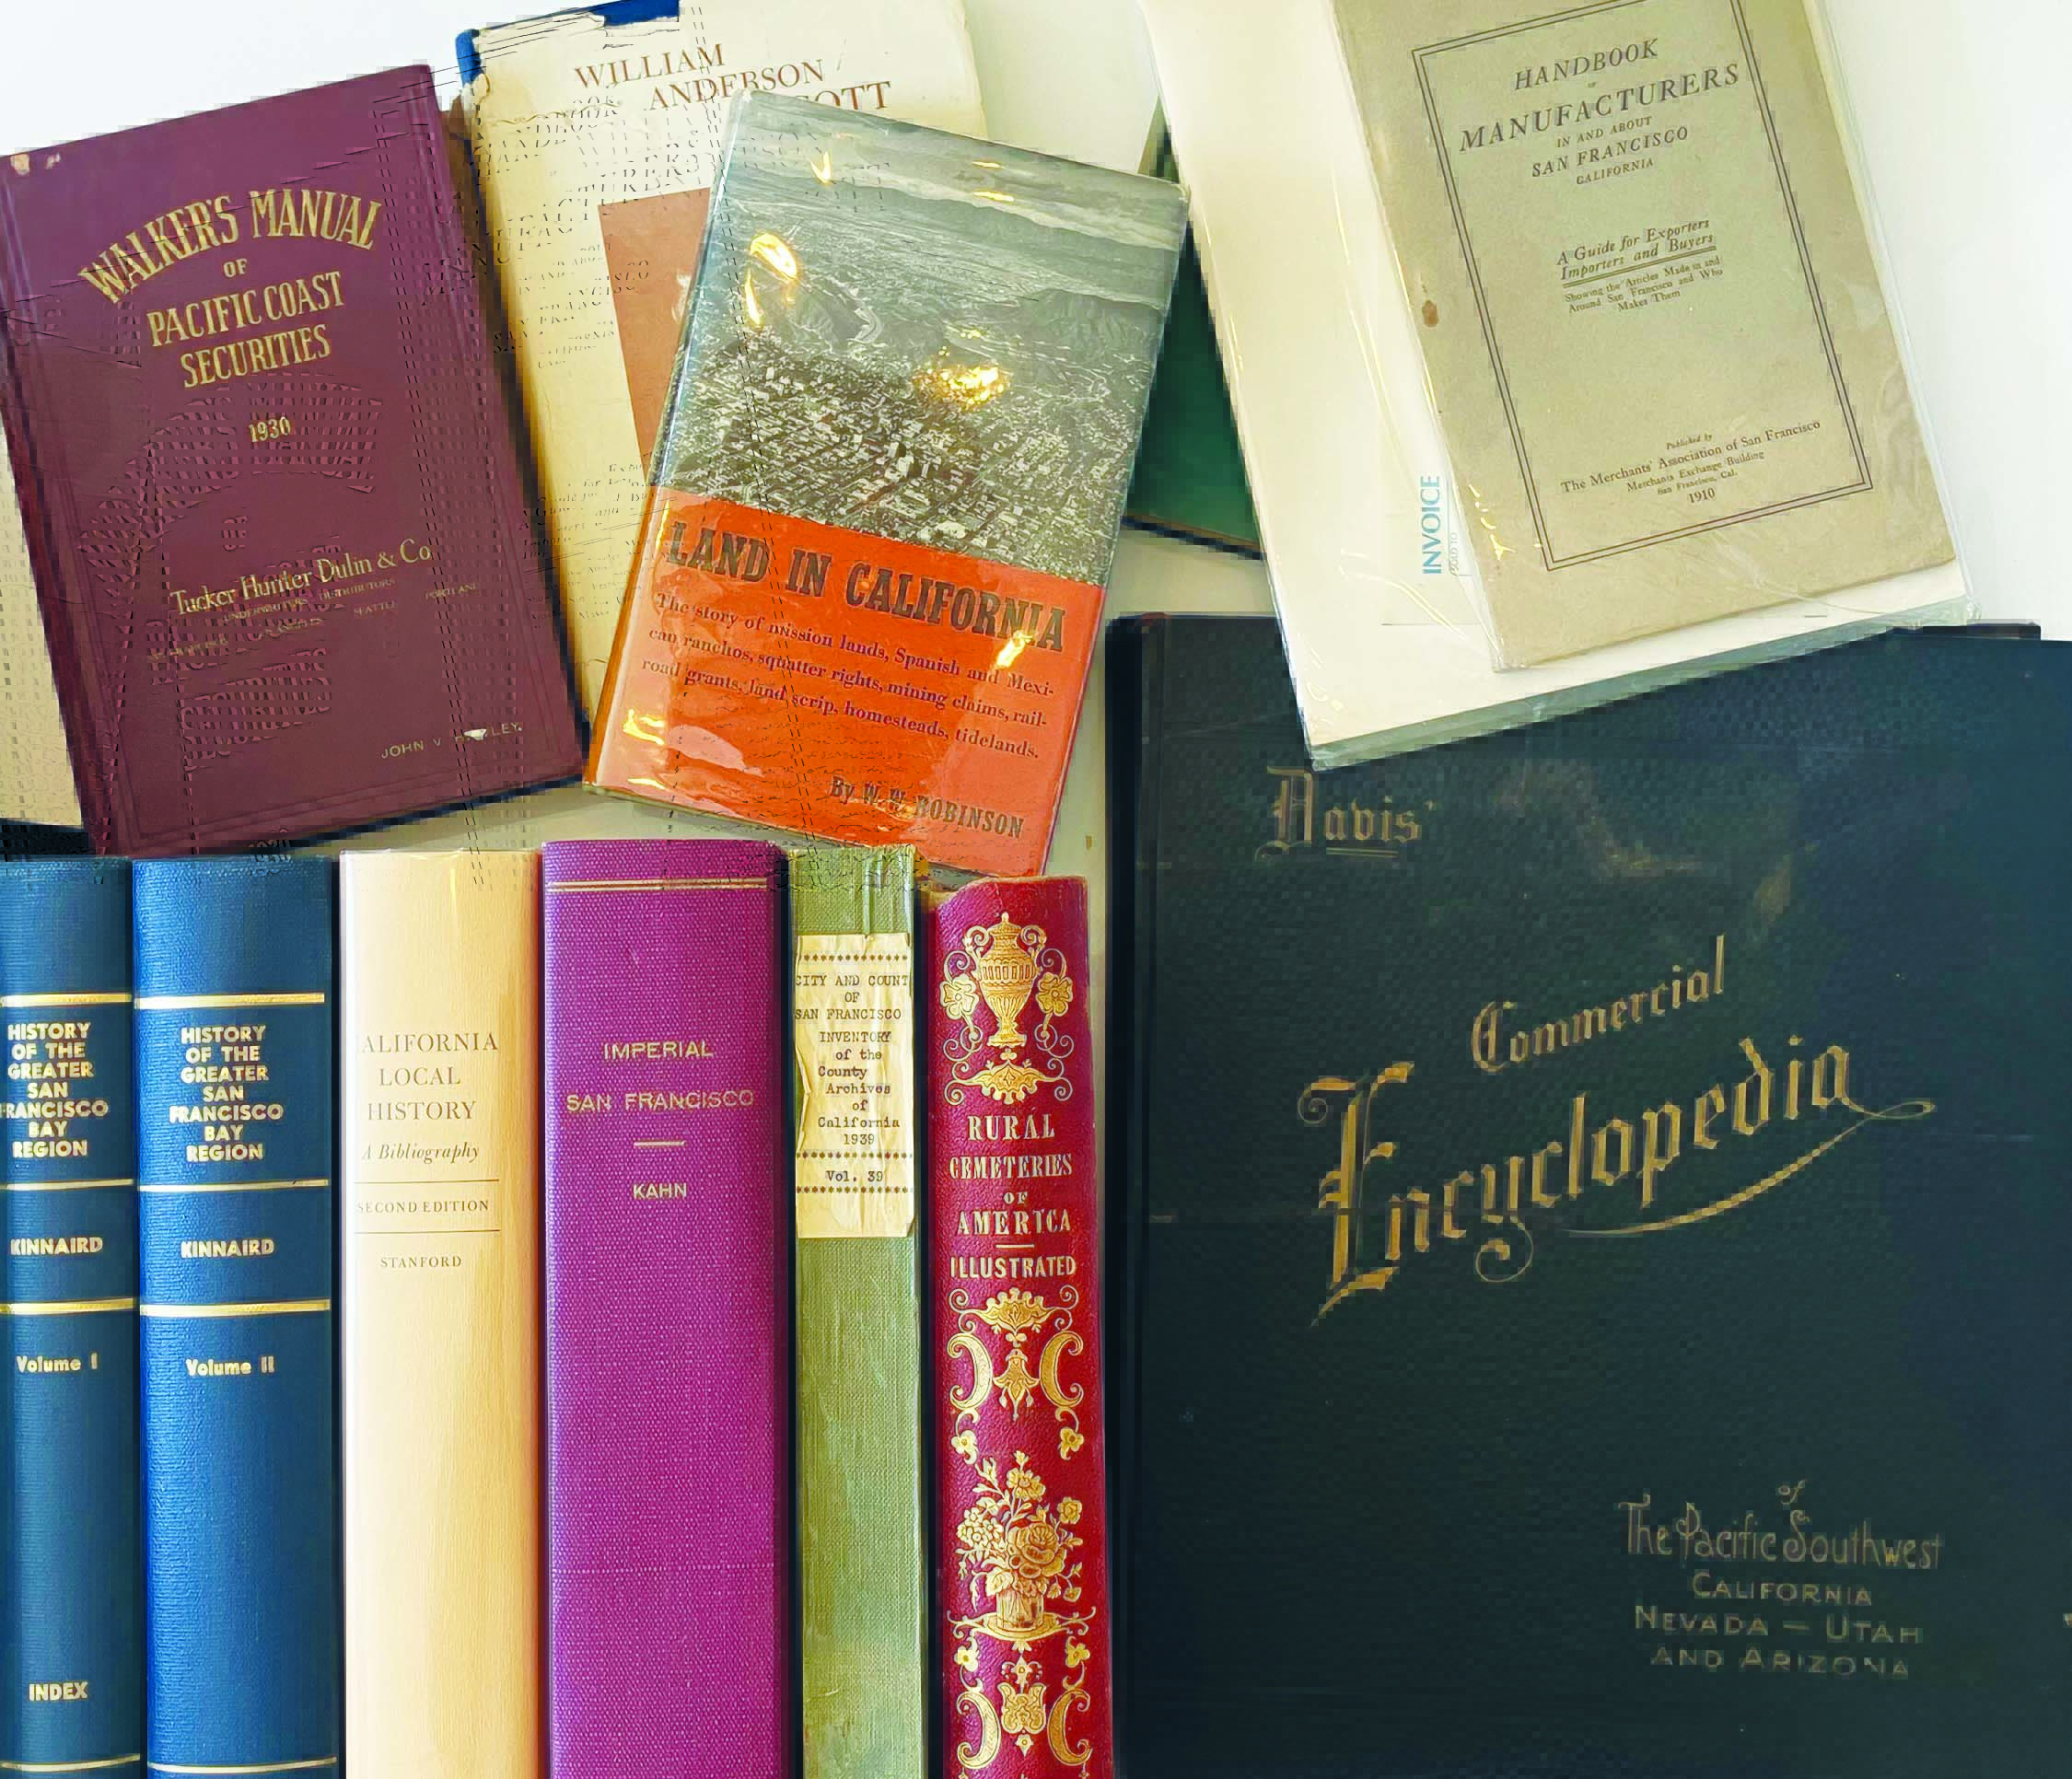 A collection of antique books, some with titles on Californian themes, history, and finance.